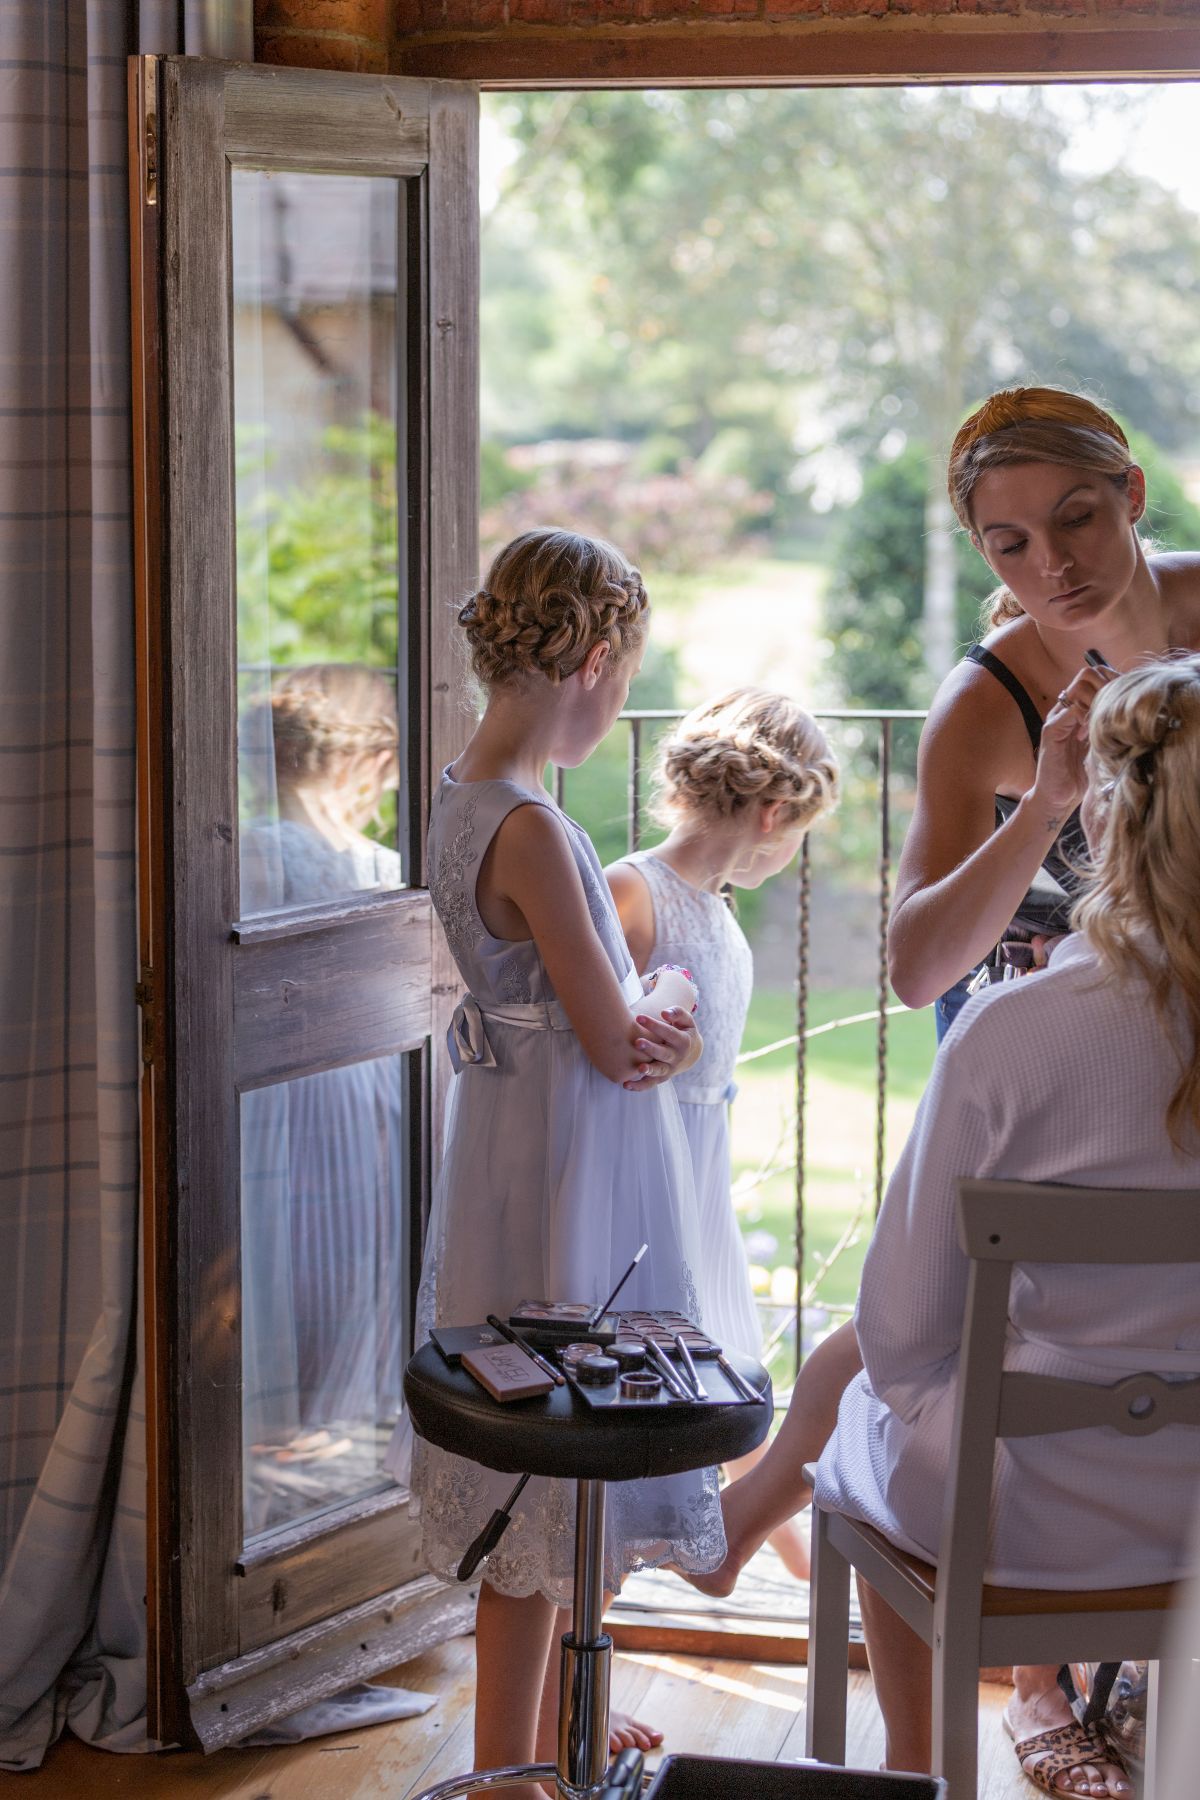 Brides preparations with flower girls looking on.